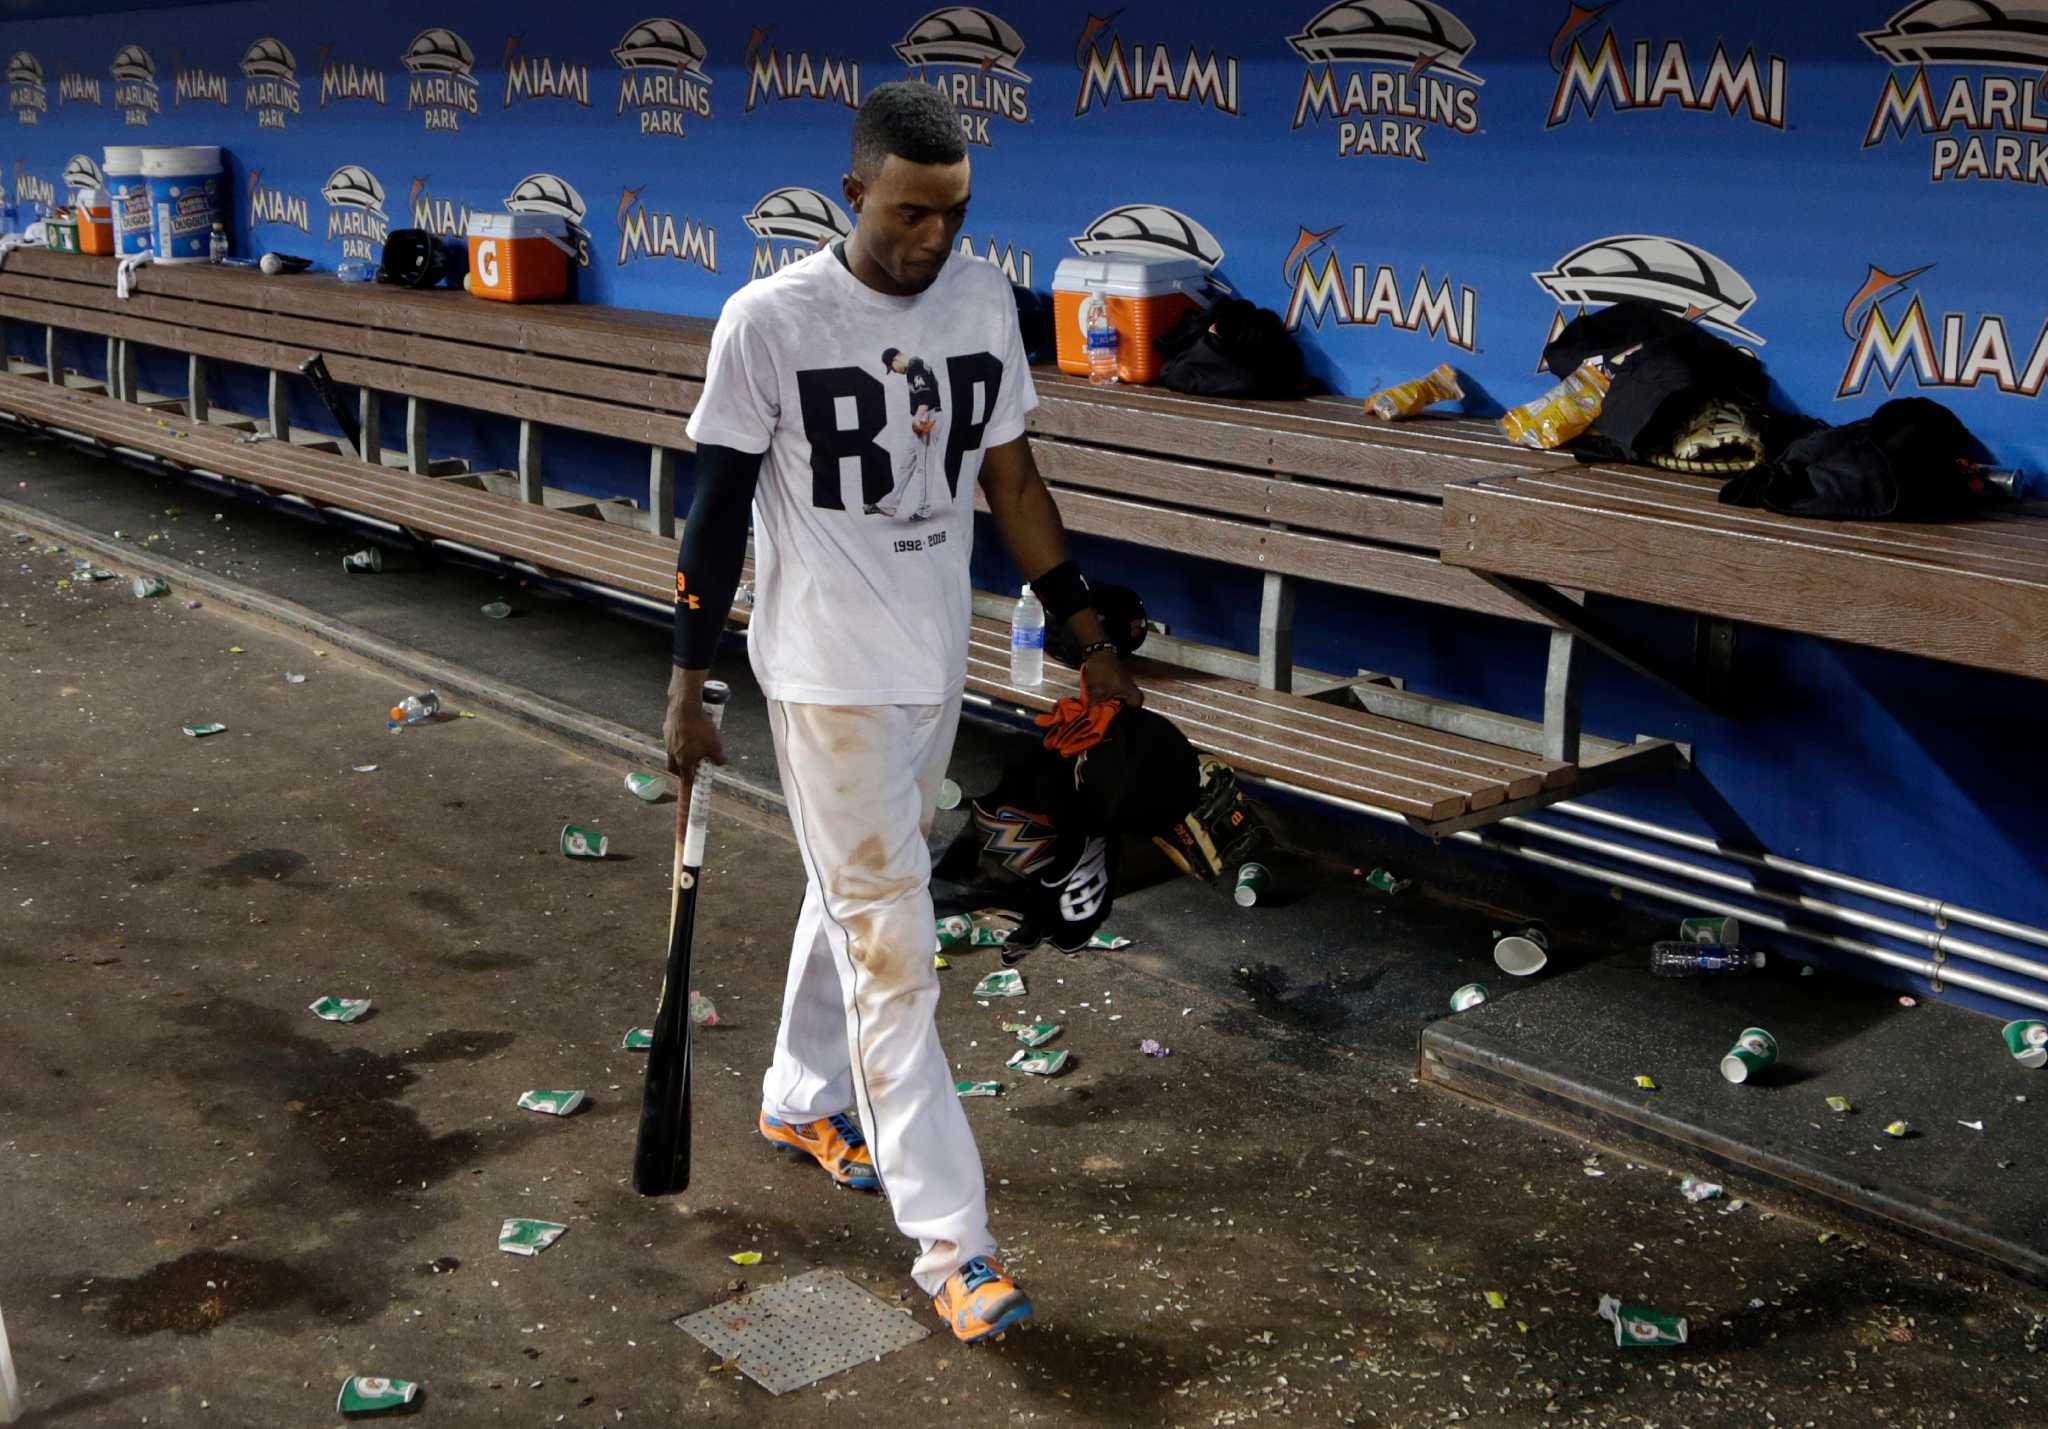 Miami Marlins will wear No. 16 jerseys on Monday to honor Jose